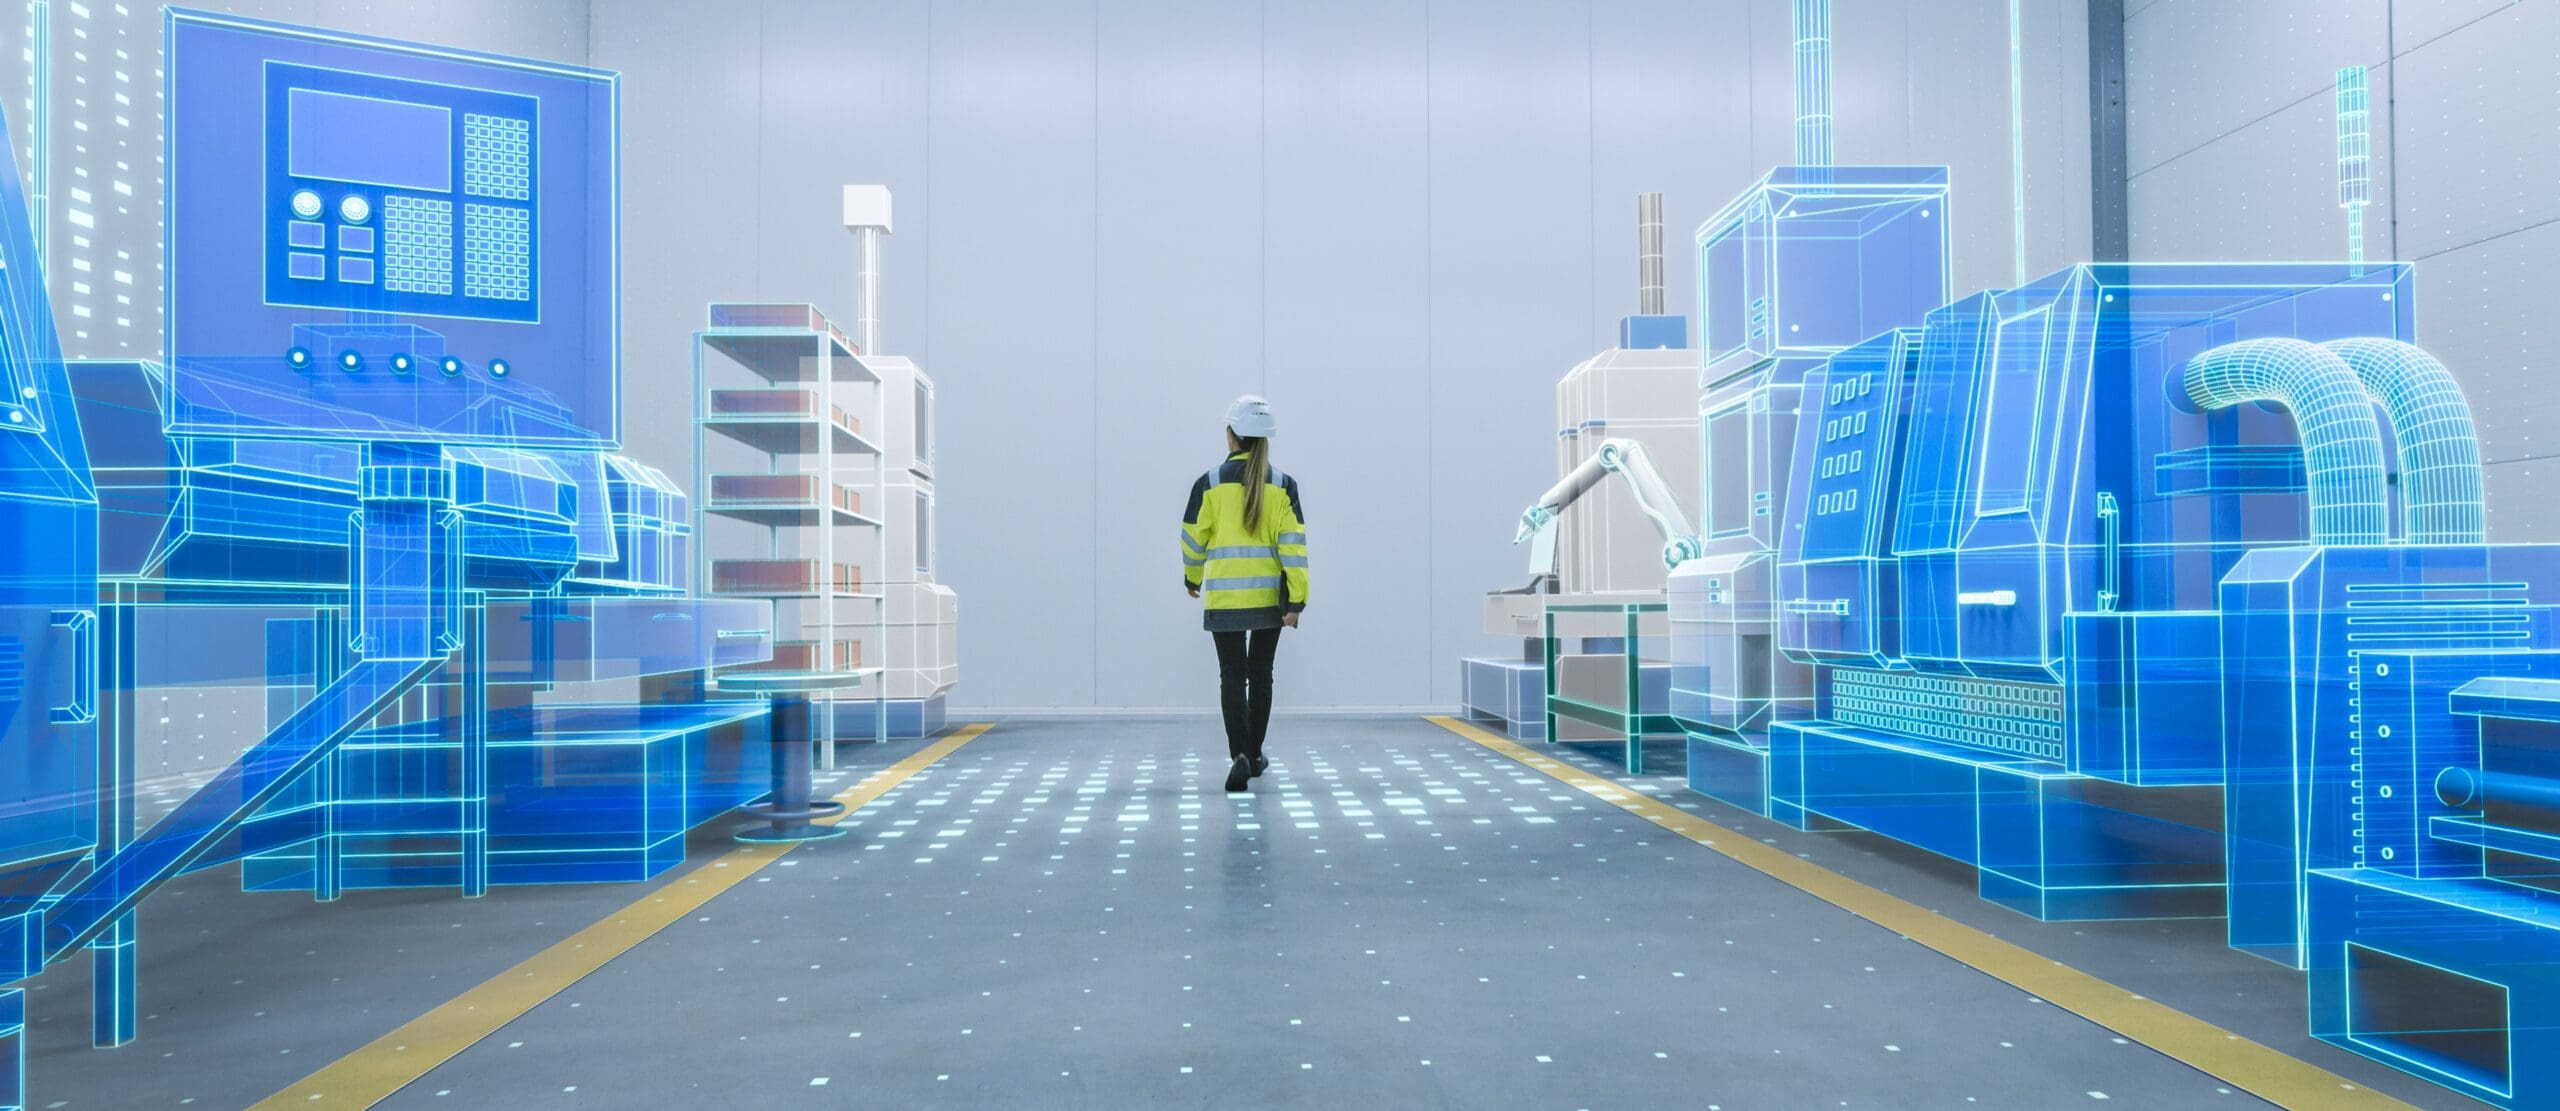 Engineer Walks Through Factory Workshop with Augmented Reality 3D Models